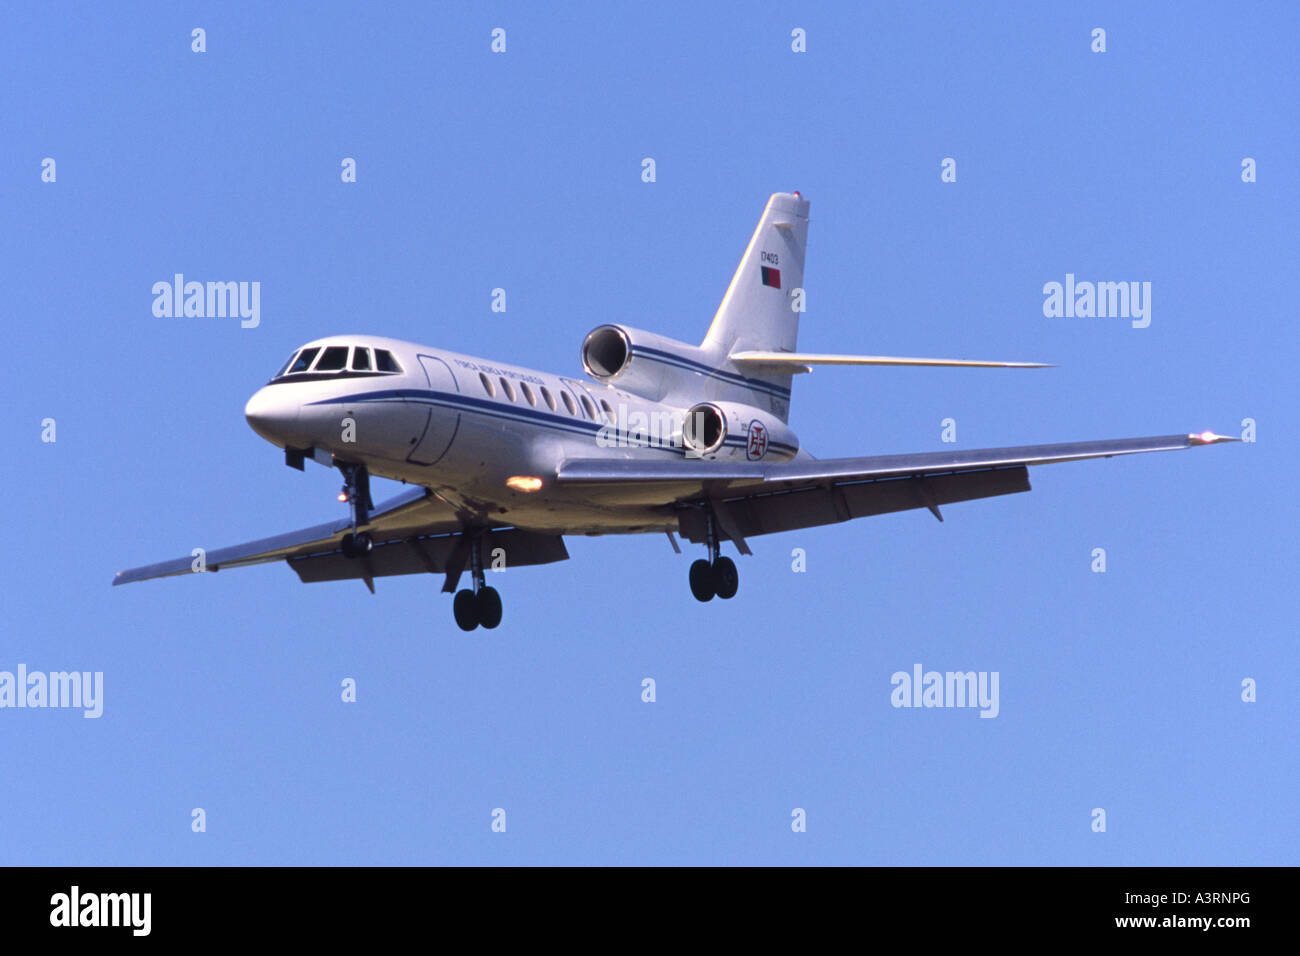 Dassault Falcon 50 operated by Esq 504 of the Portuguese Air Force Stock Photo